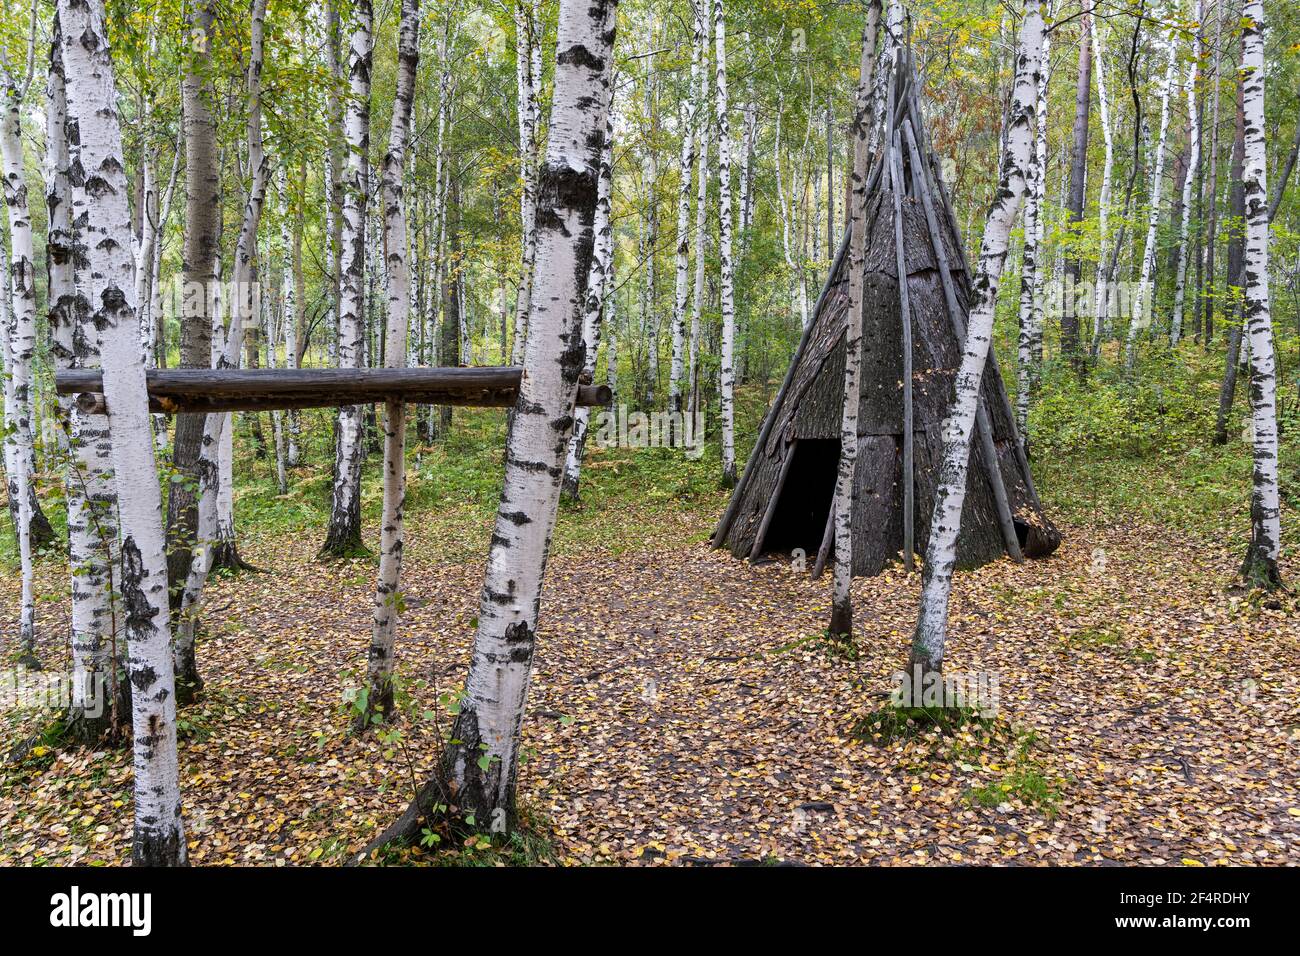 Taltsy, Russia - September 5, 2019: Wooden bark tent in a birch forest in the Taltsy Museum Siberia, Russia. Stock Photo